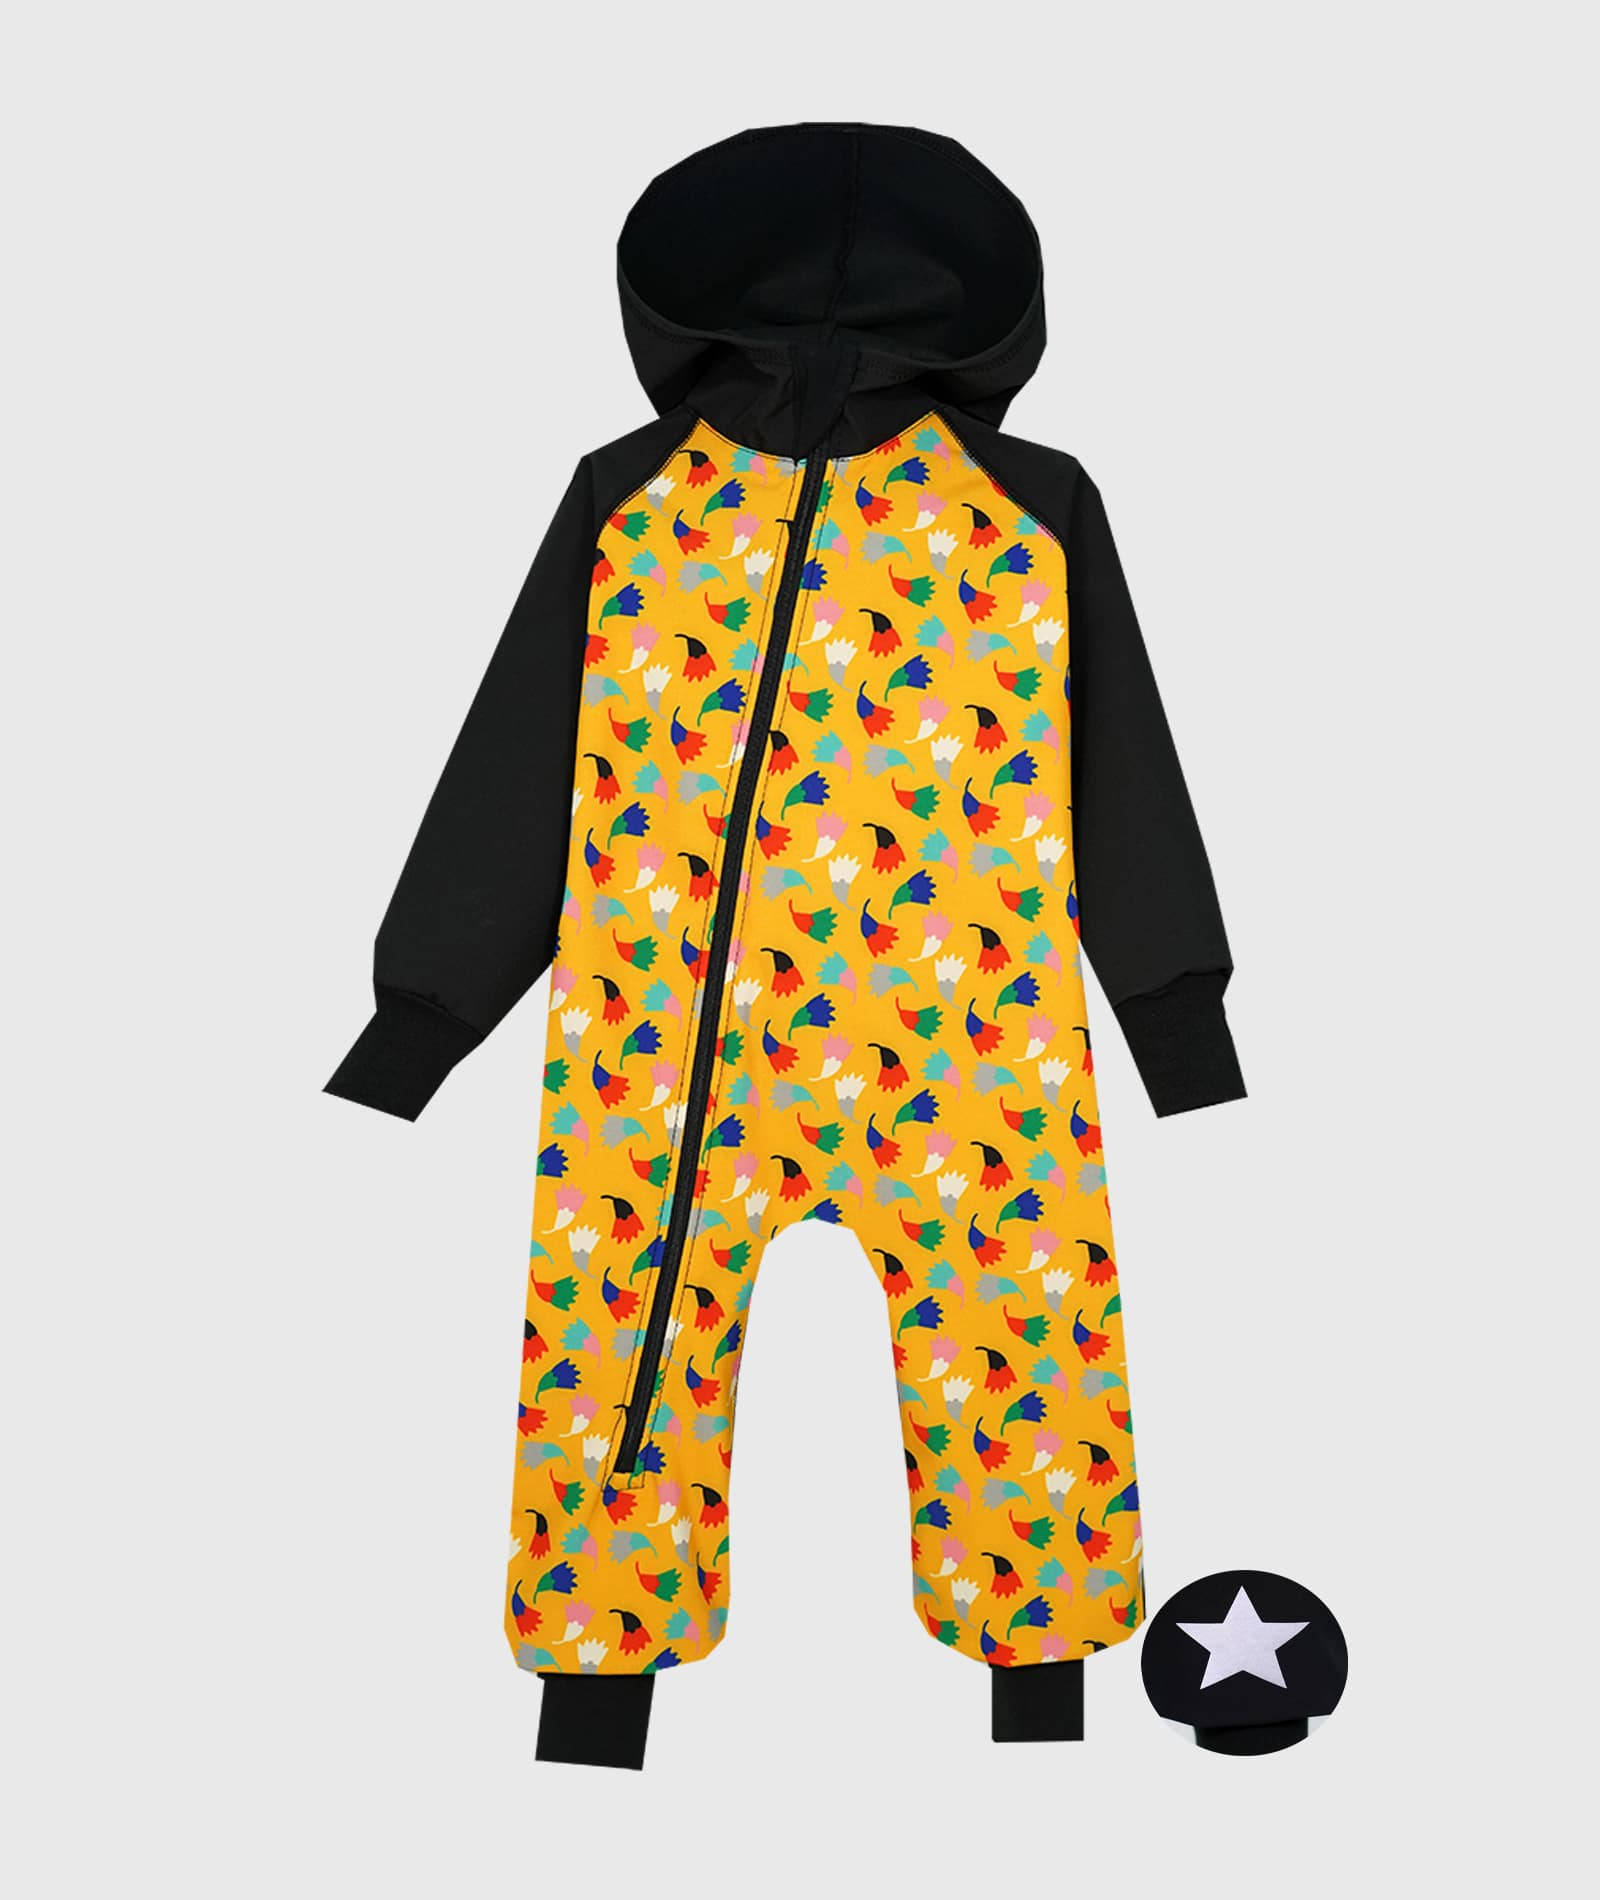 Waterproof Softshell Overall Comfy Black And Yellow Tulips Jumpsuit von iELM